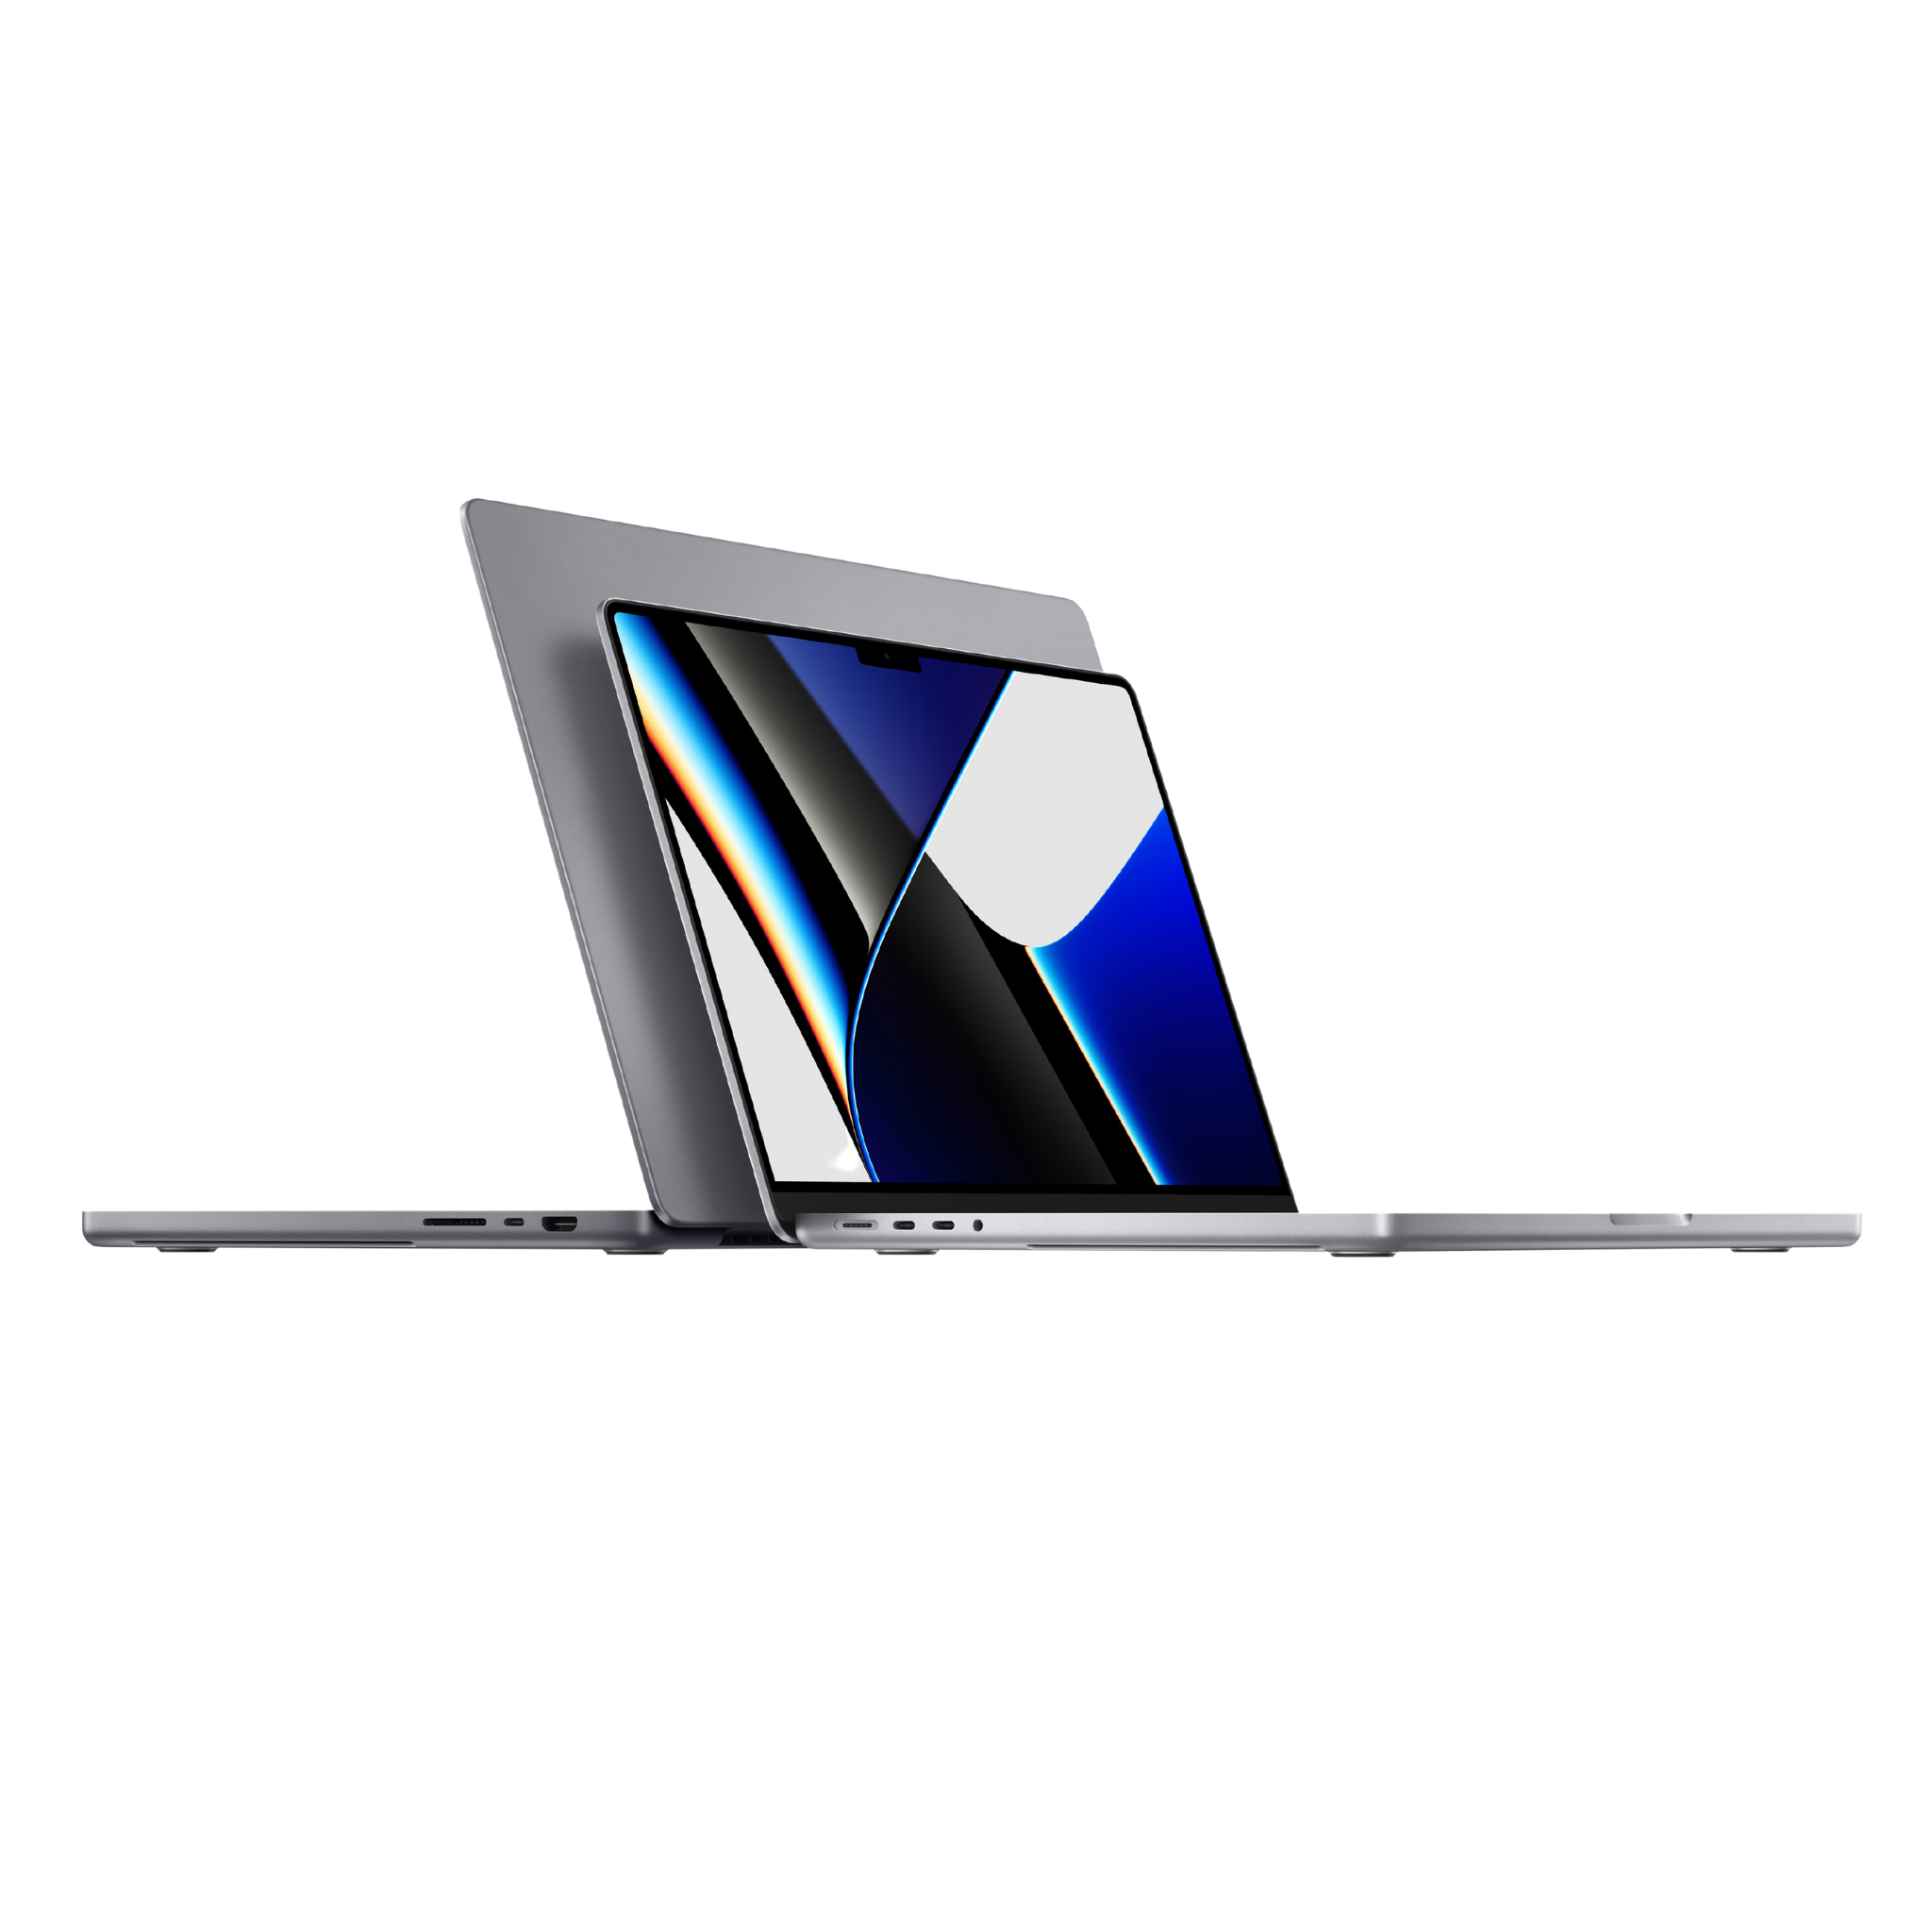 MacBook Pro 16-inch, M1 Max chip with 10-core CPU, 32-core GPU and 16-core Neural Engine - 1TB SSD Storage (Space Grey)